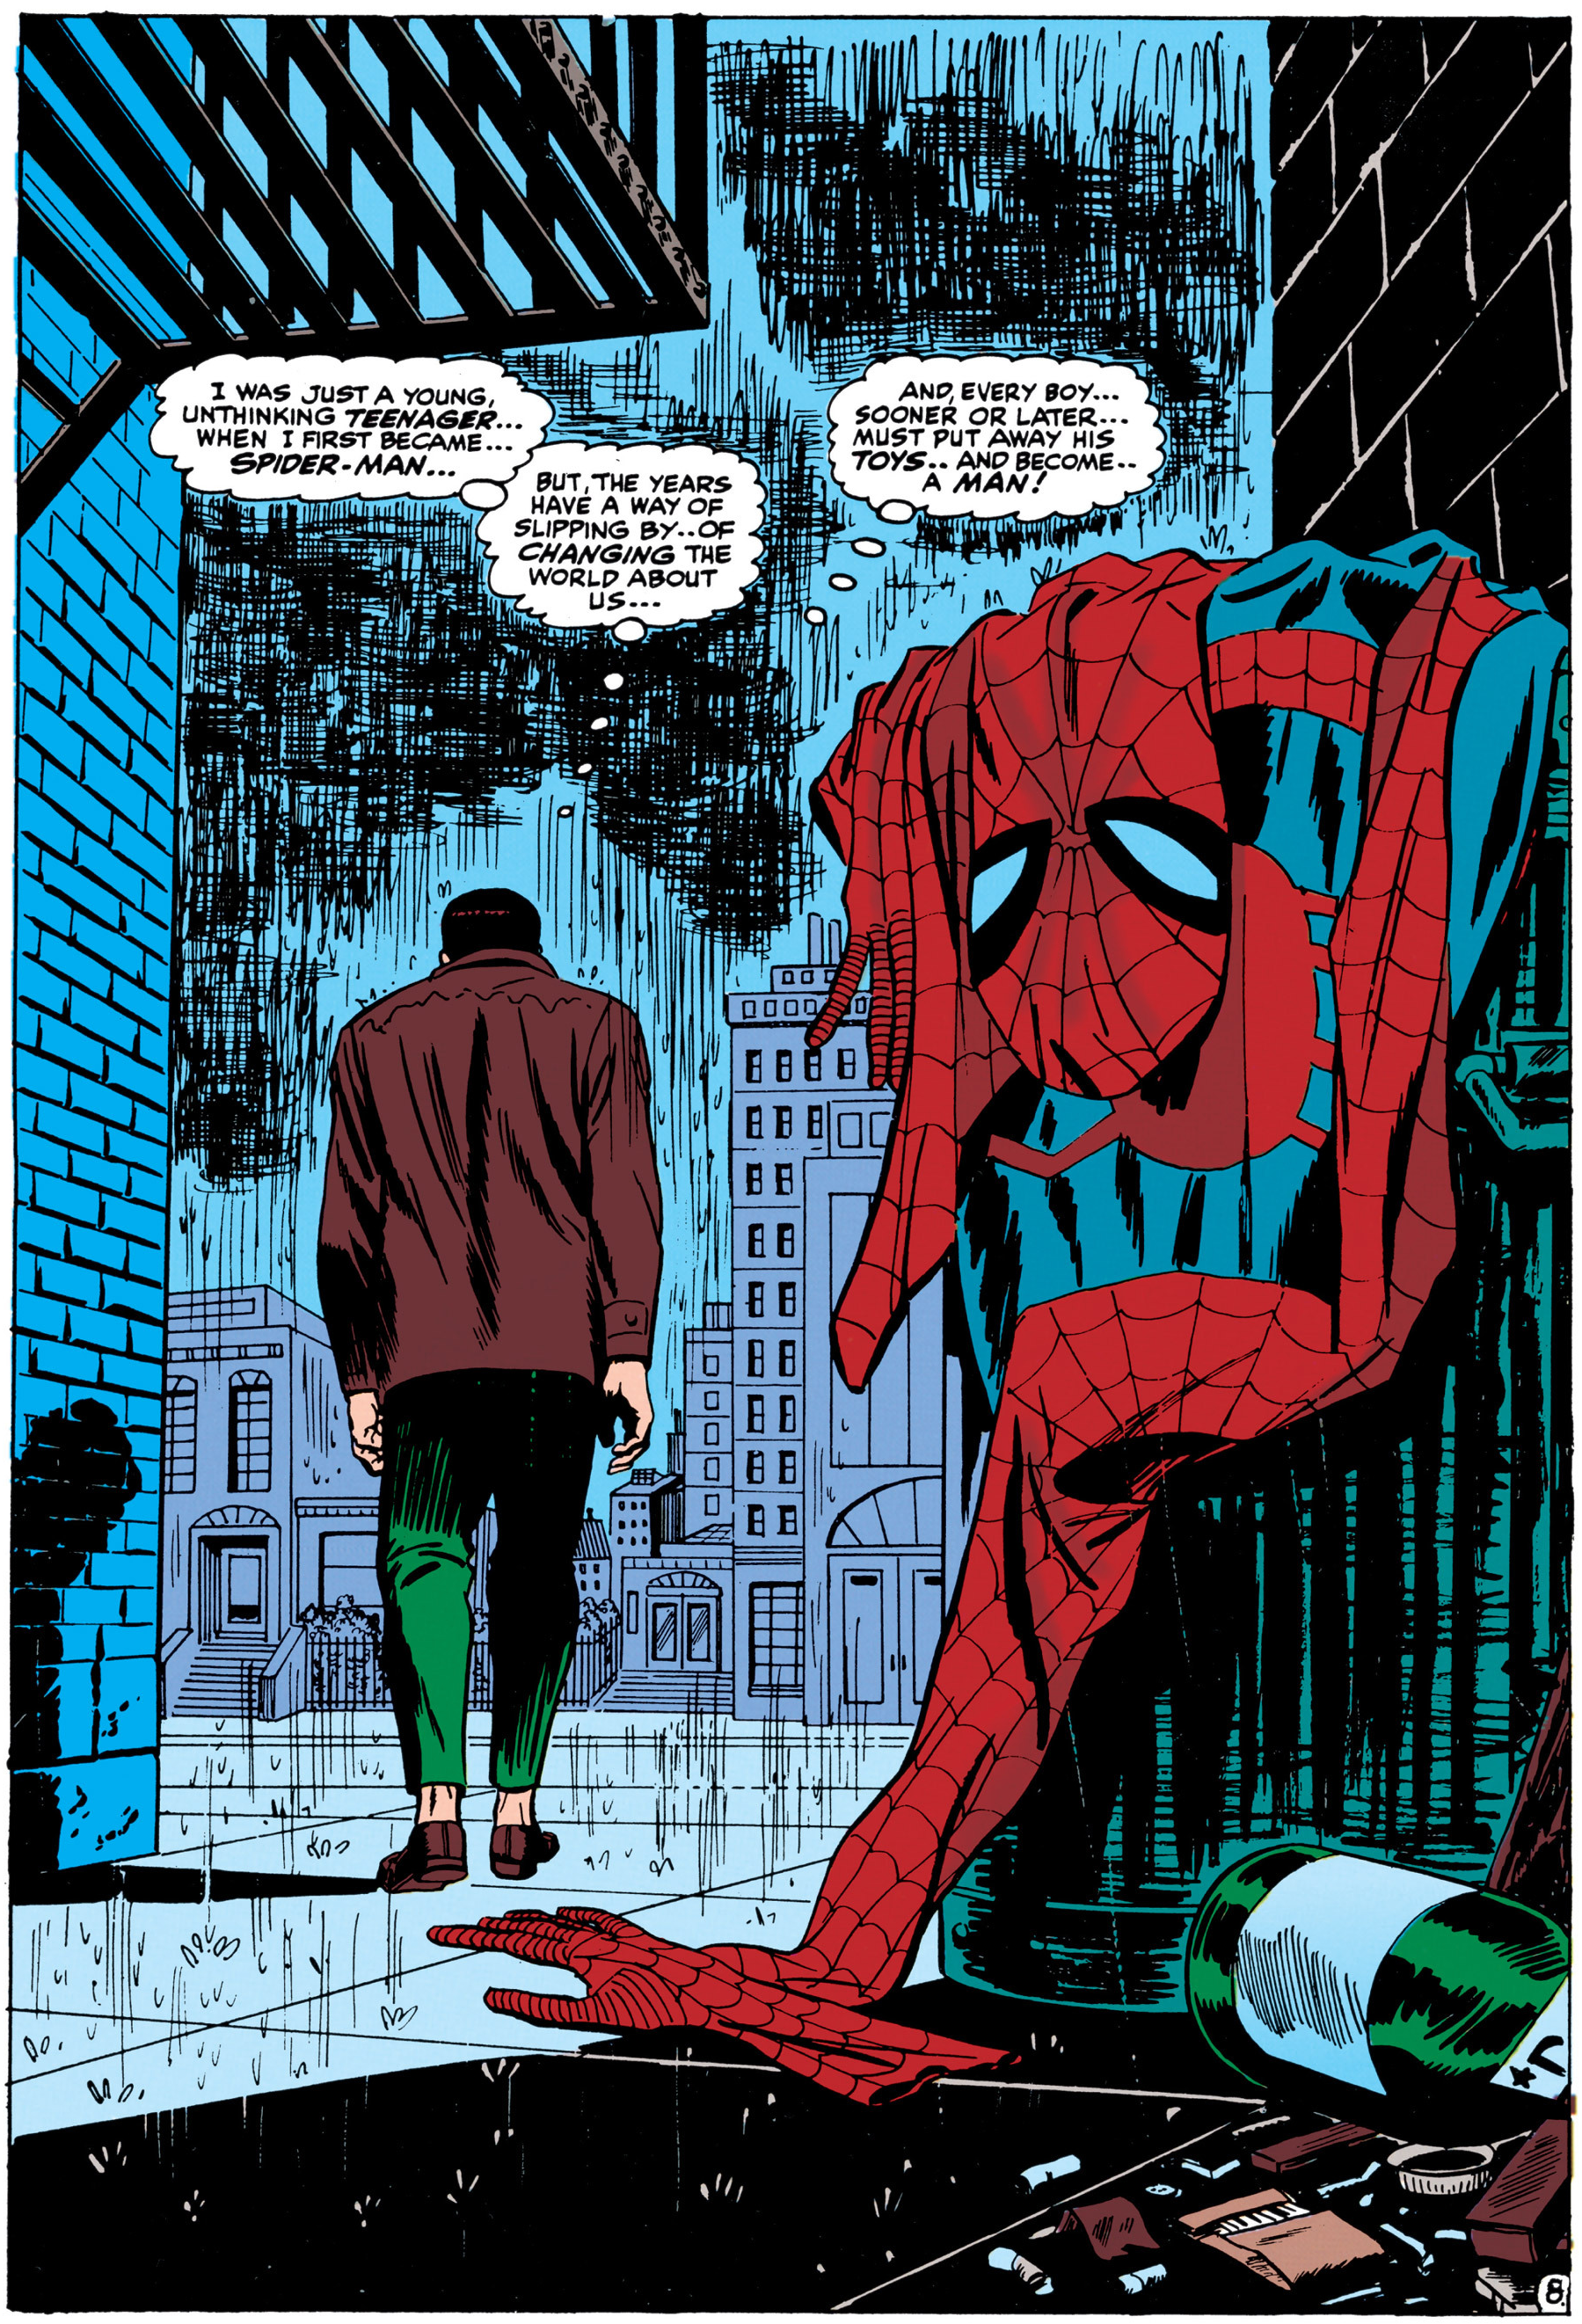 Peter Parker gives up his webs in Amazing Spider-Man Vol. 1 #50 "Spider-Man No More!" (1967), Marvel Comics. Words by Stan Lee, art by John Romita Sr., Mickey Demeo, and Sam Rosen.